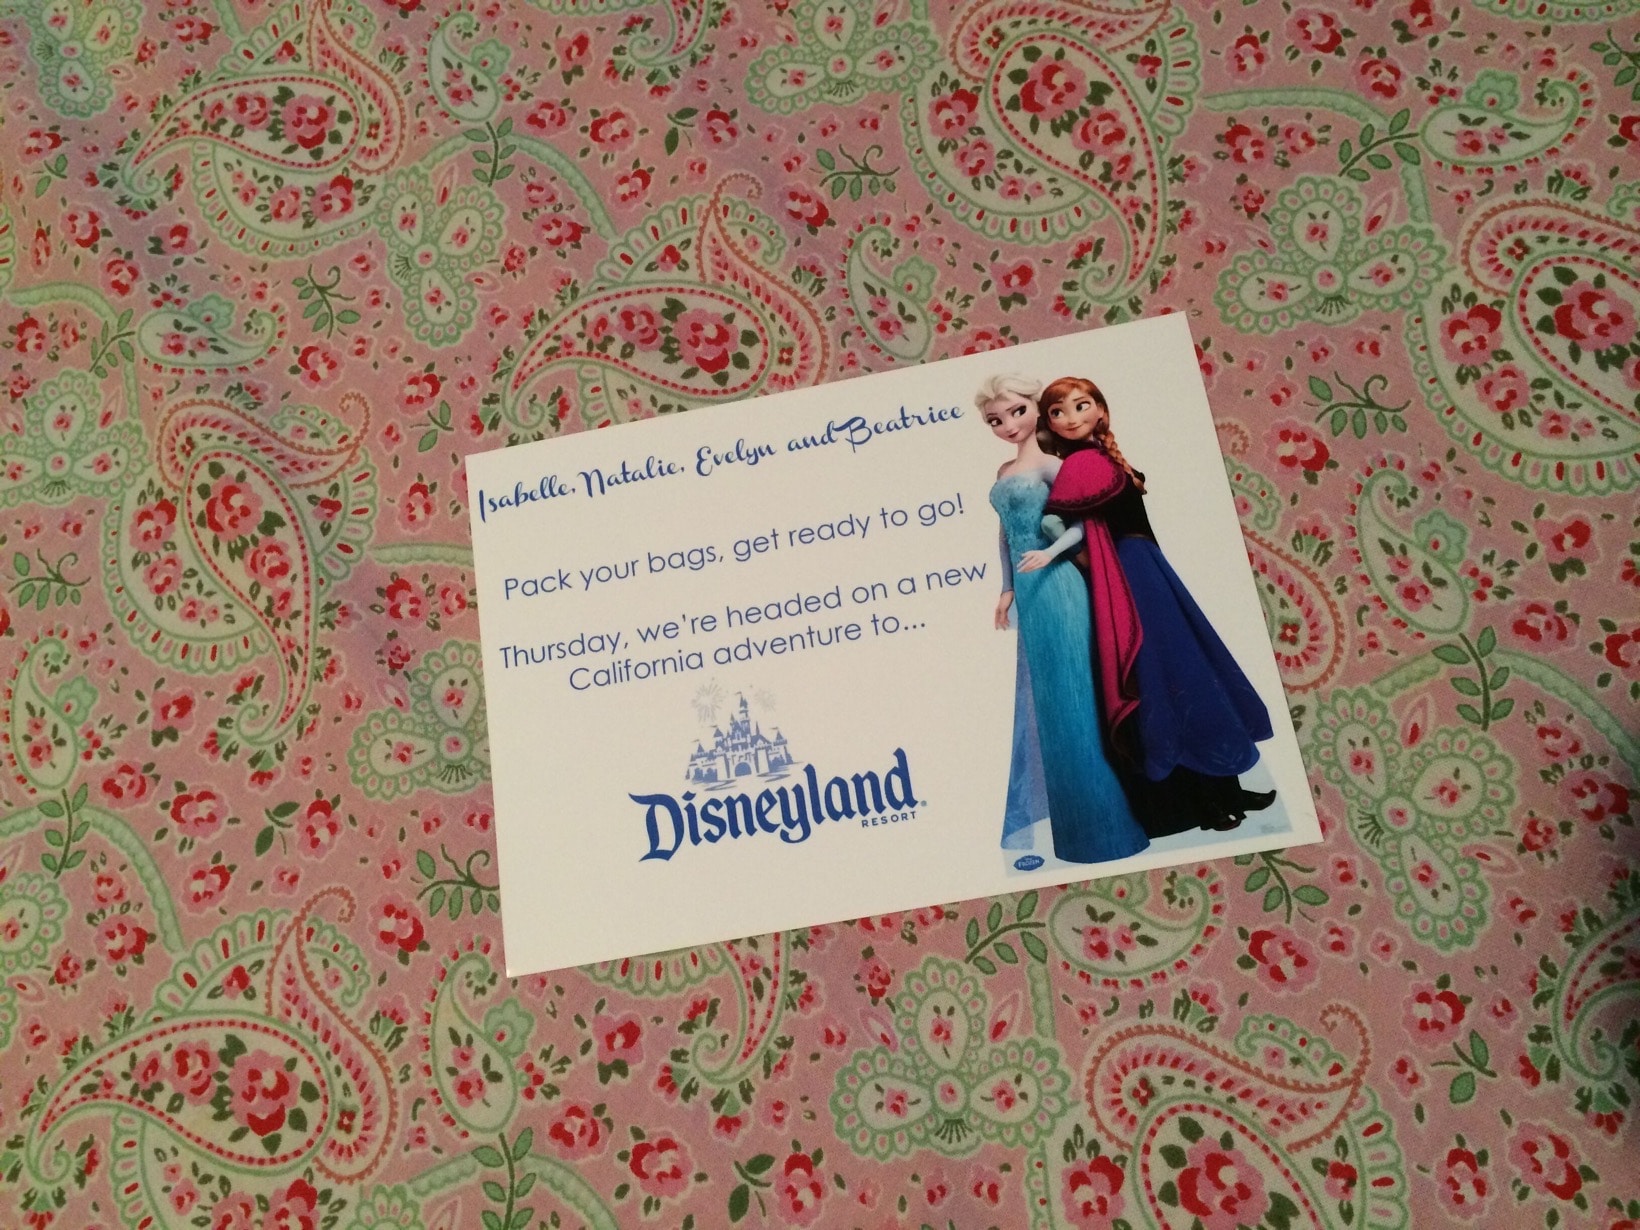 Going to Disneyland with a card